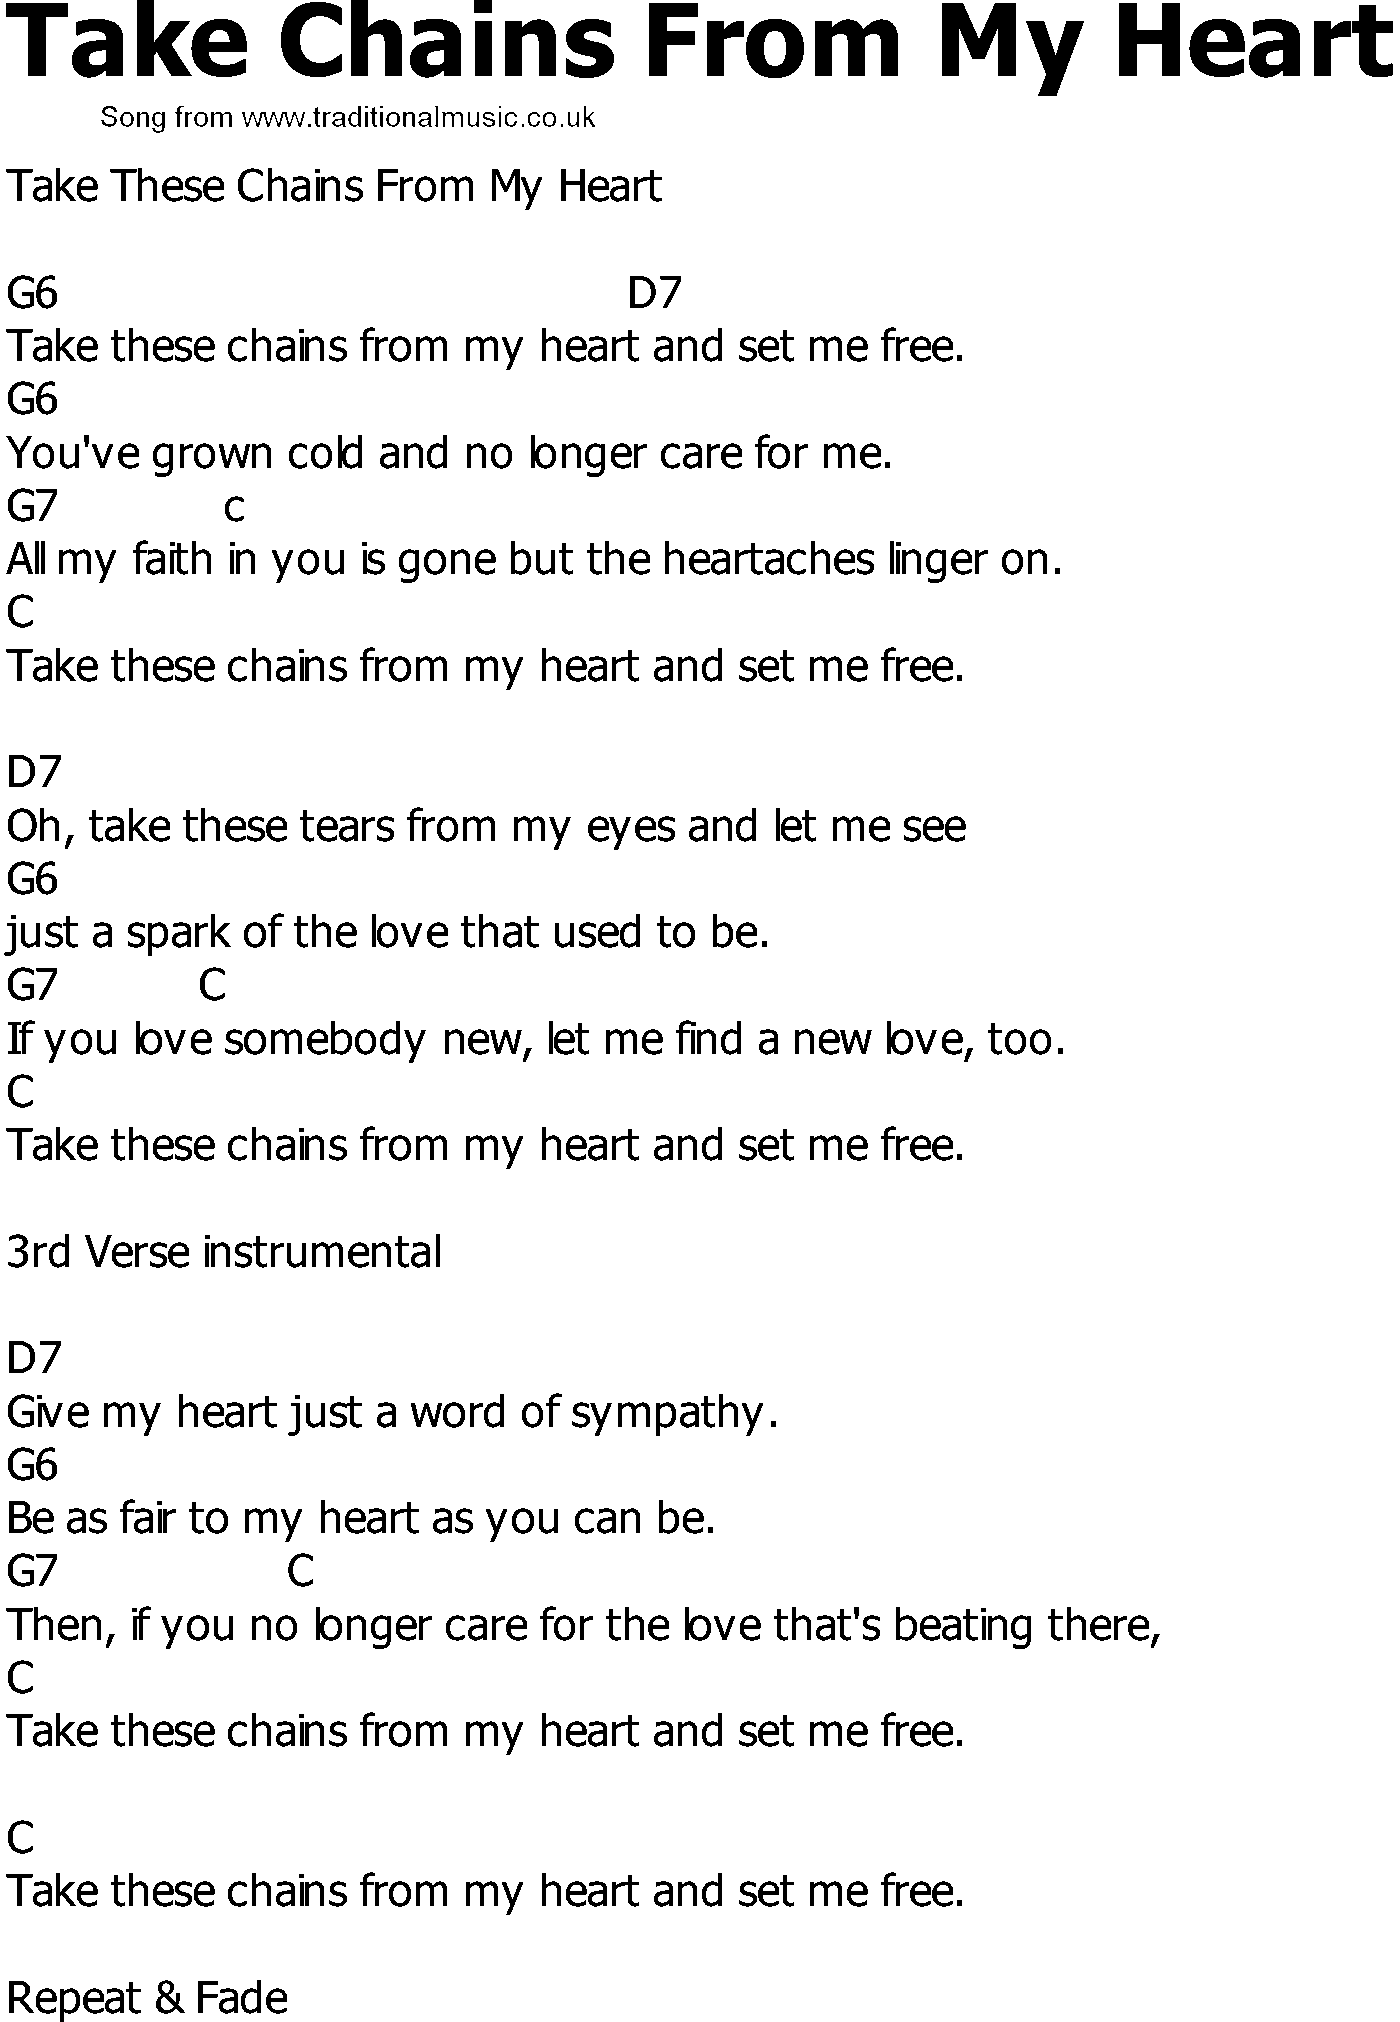 Old Country song lyrics with chords - Take Chains From My Heart